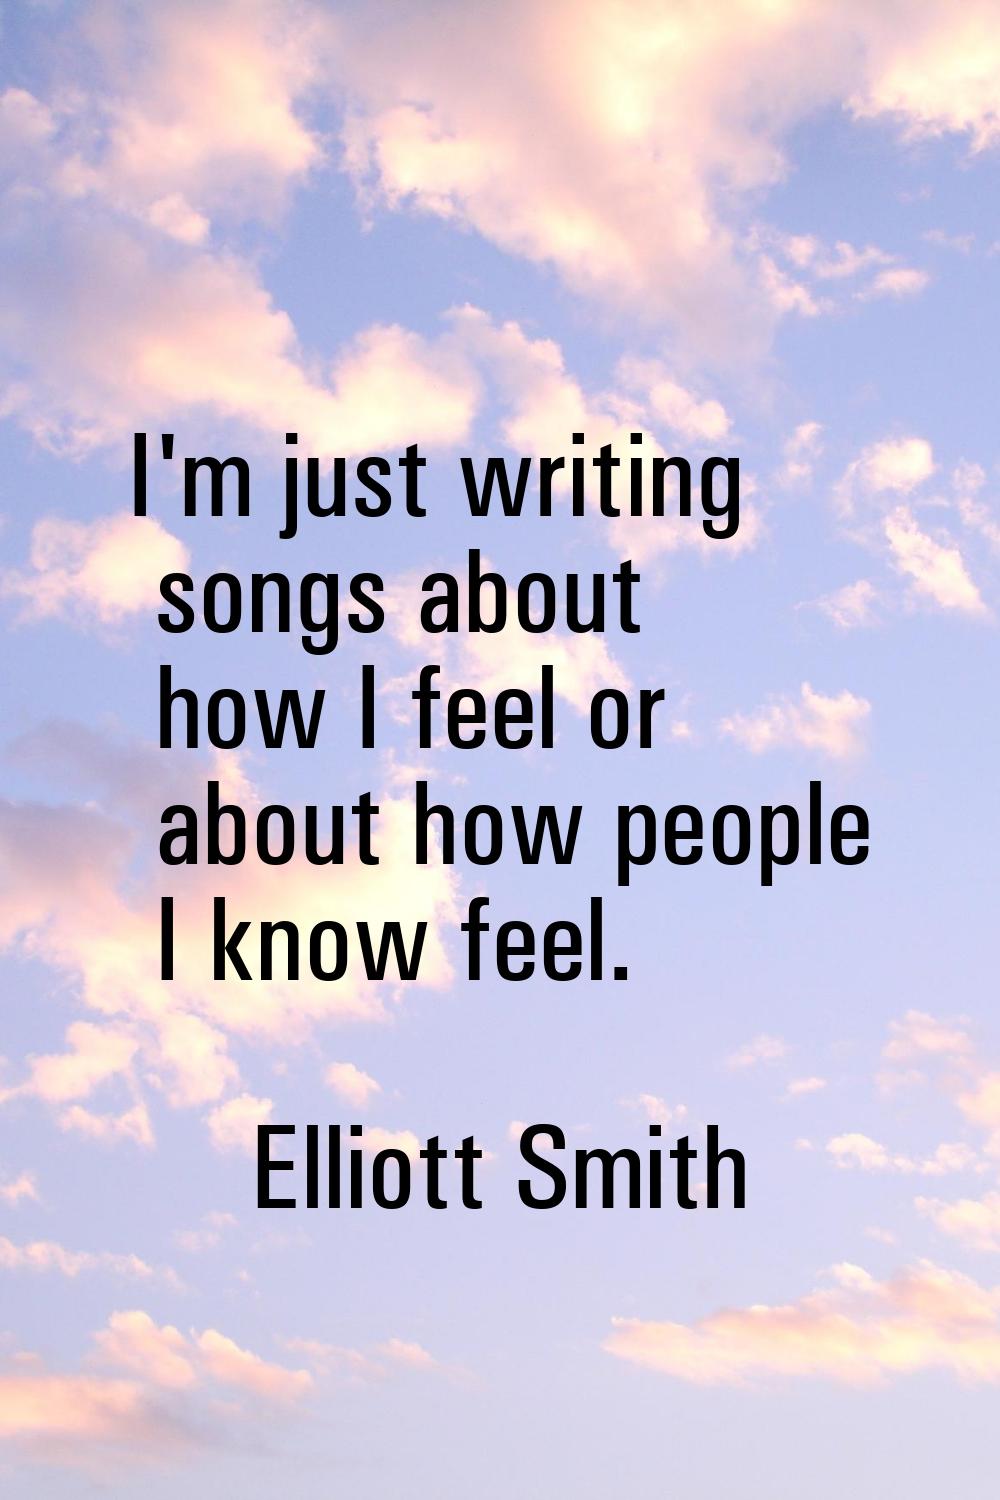 I'm just writing songs about how I feel or about how people I know feel.